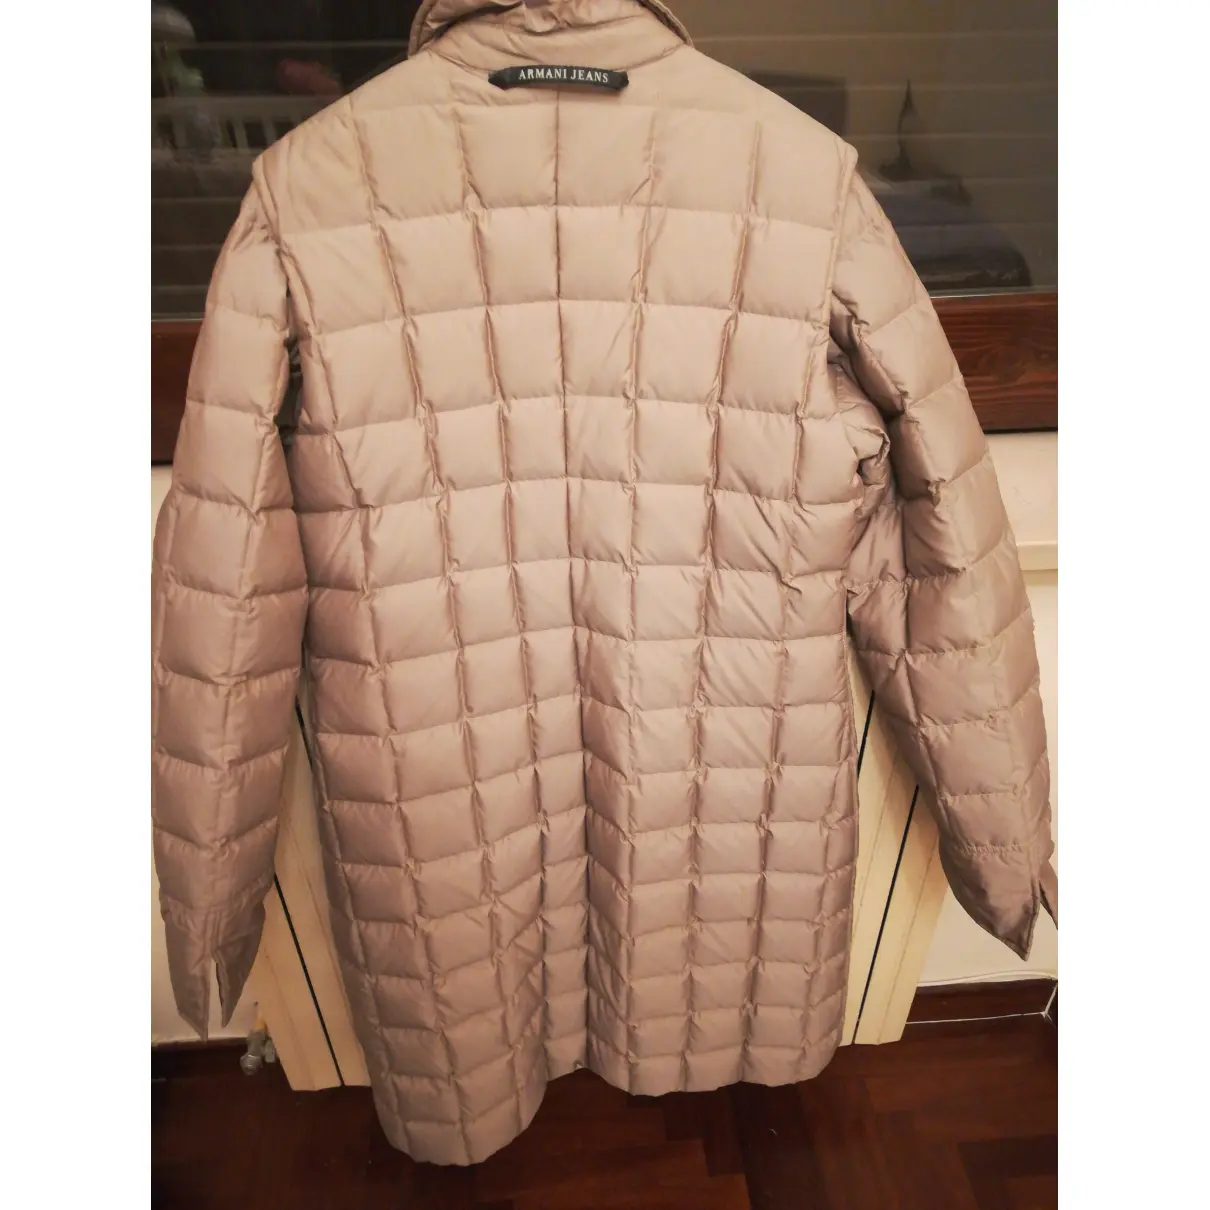 Buy Armani Jeans Puffer online